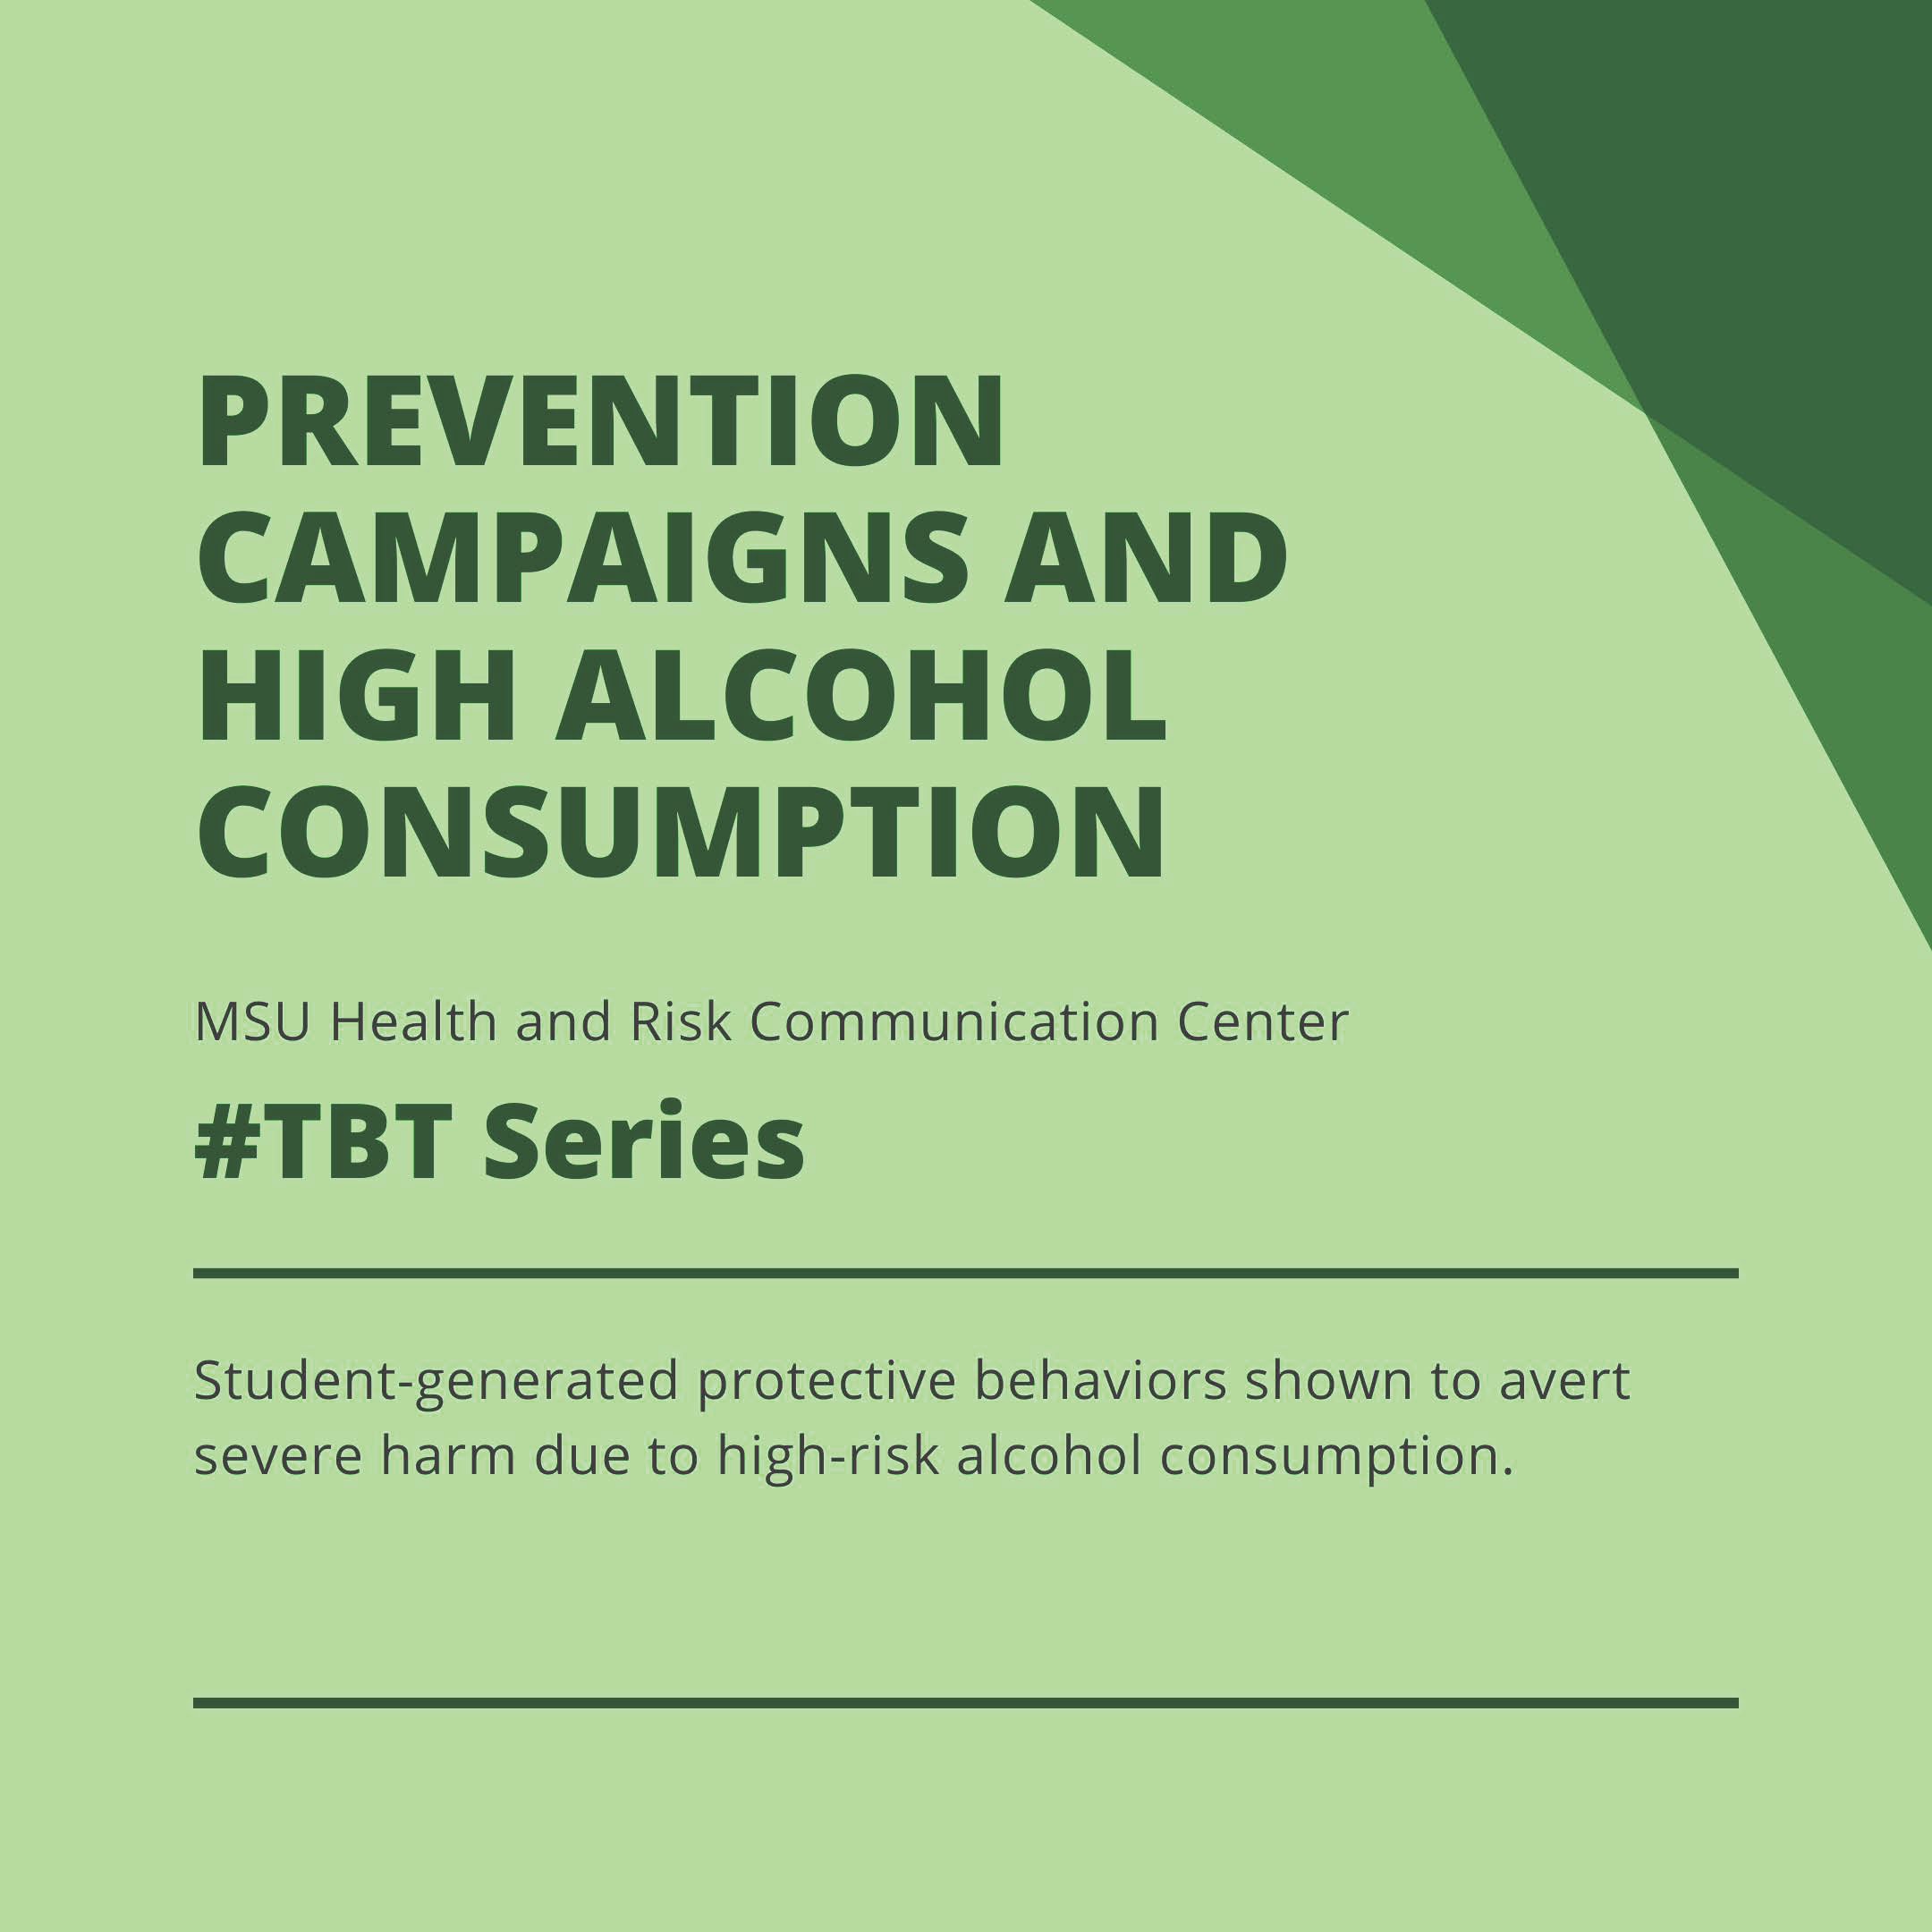 Student-Generated Protective Behaviors to Avert Severe Harm Due to High-Risk Alcohol Consumption